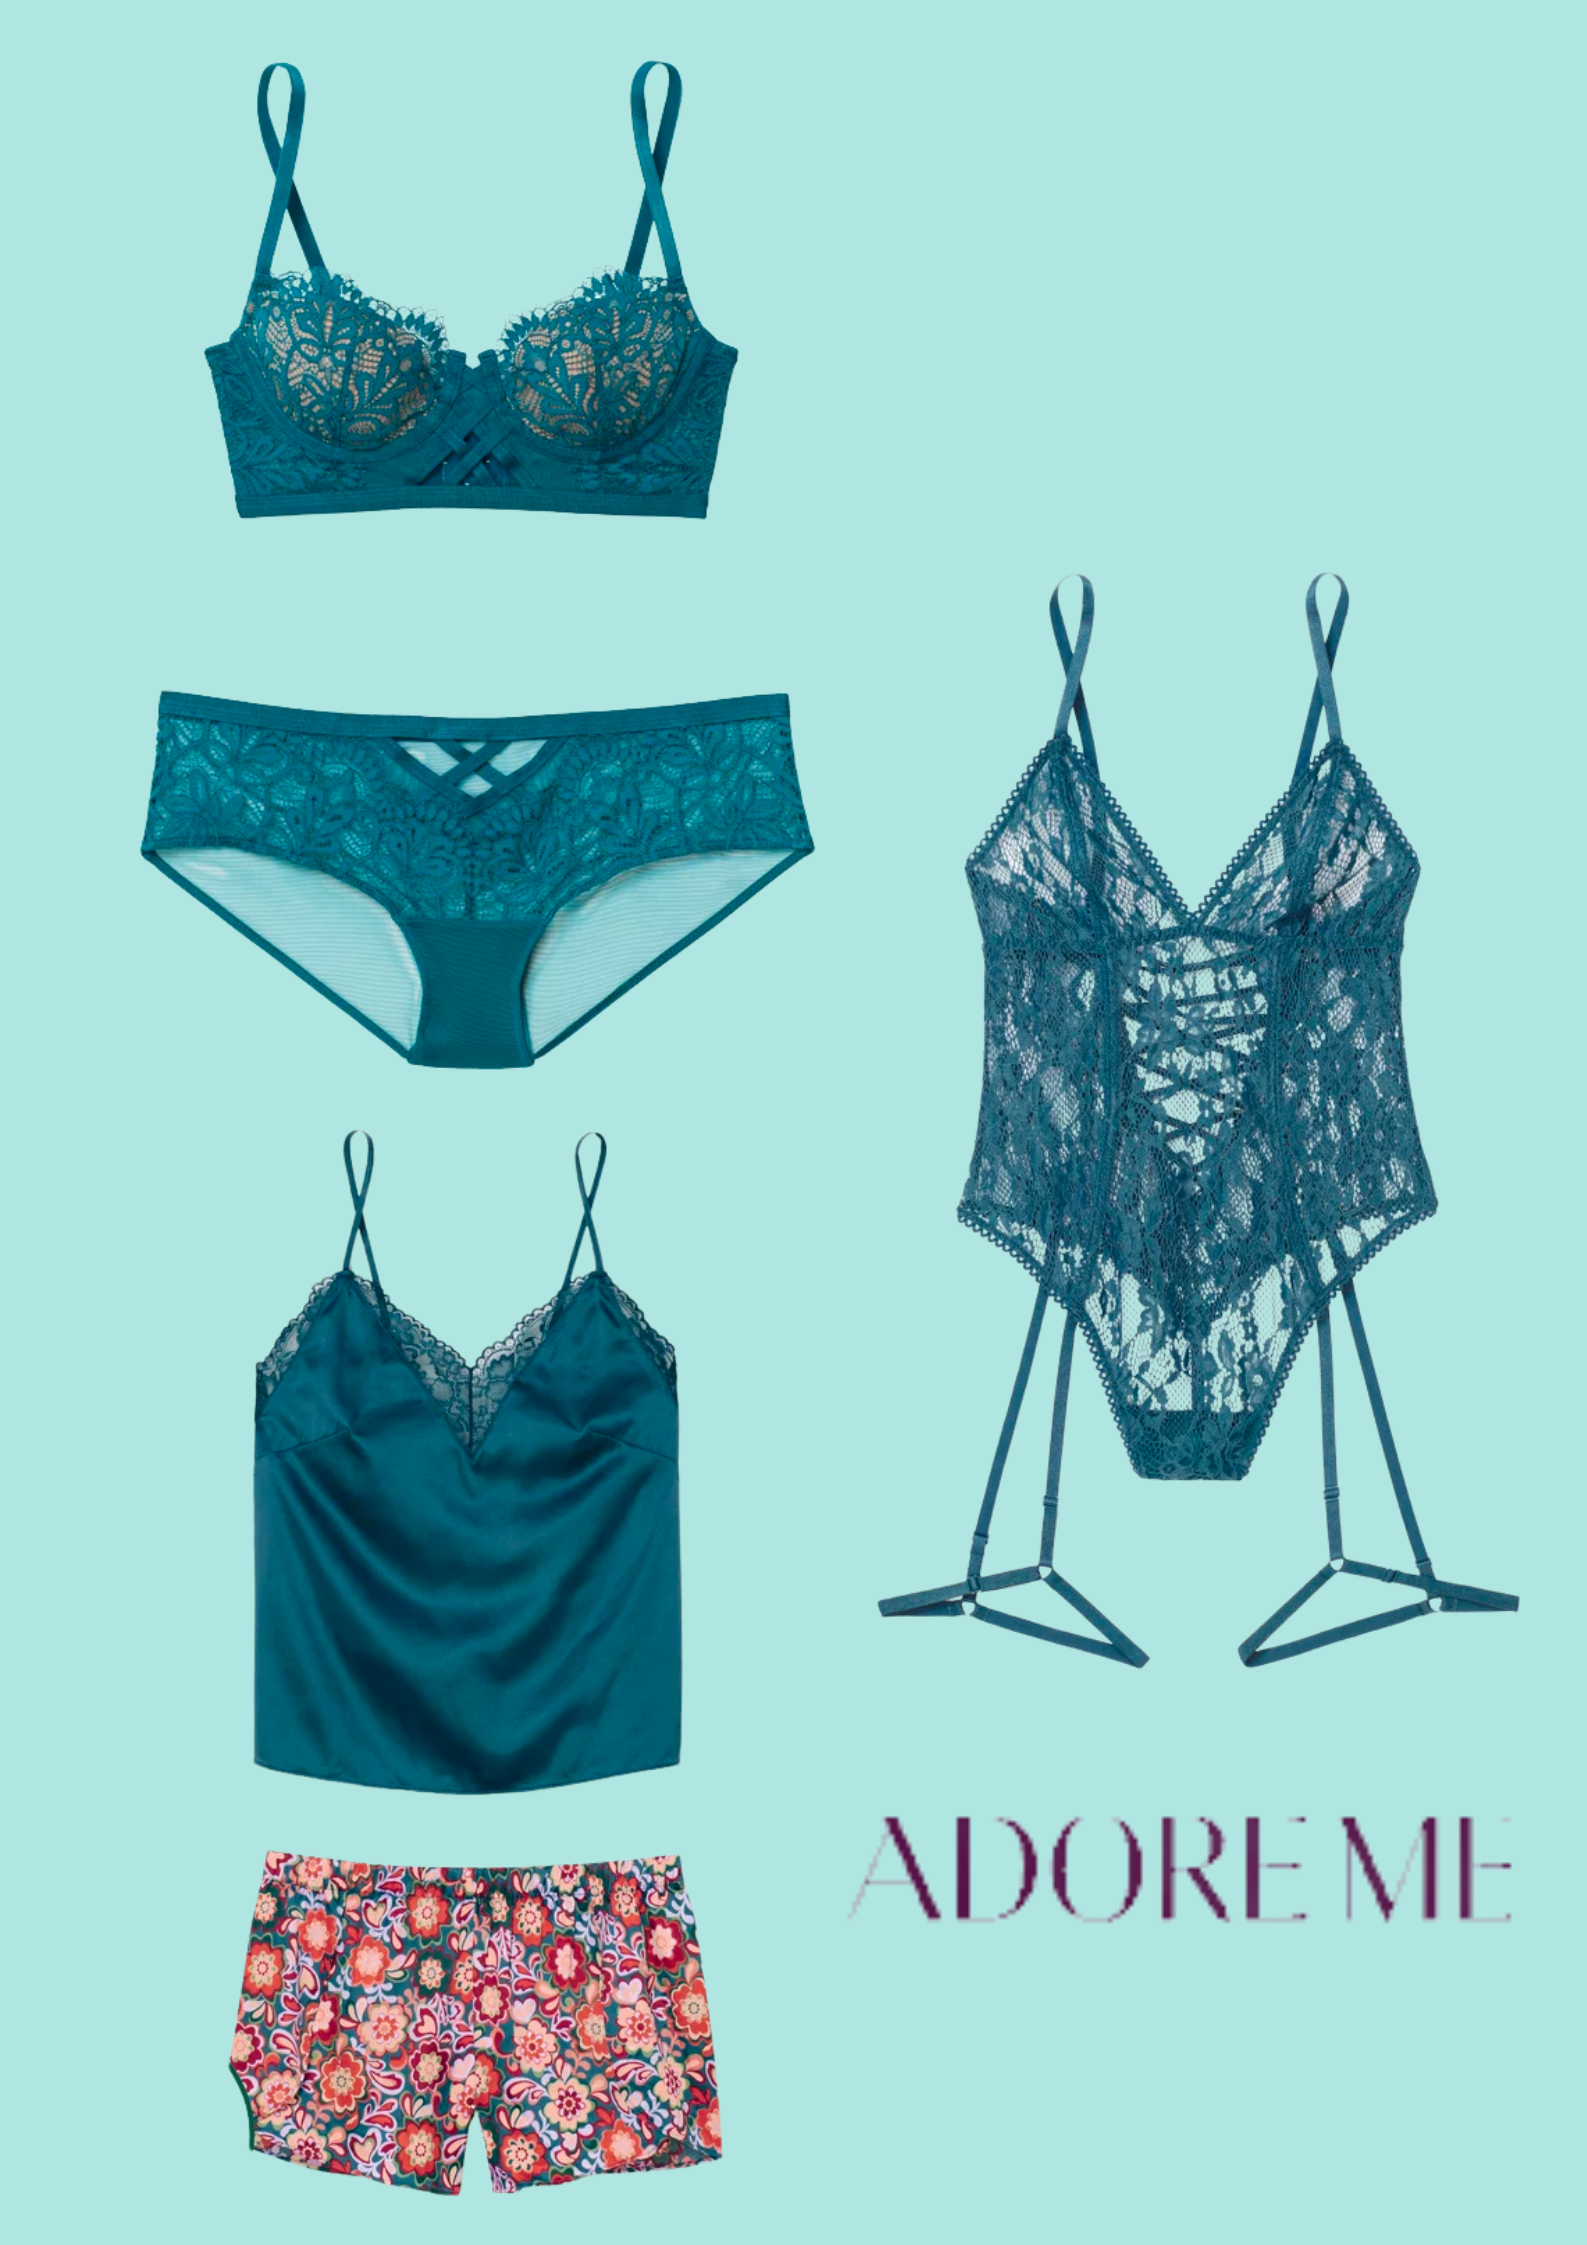 An Update on Adore Me Lingerie, Part 2b: Even More Thoughts on the